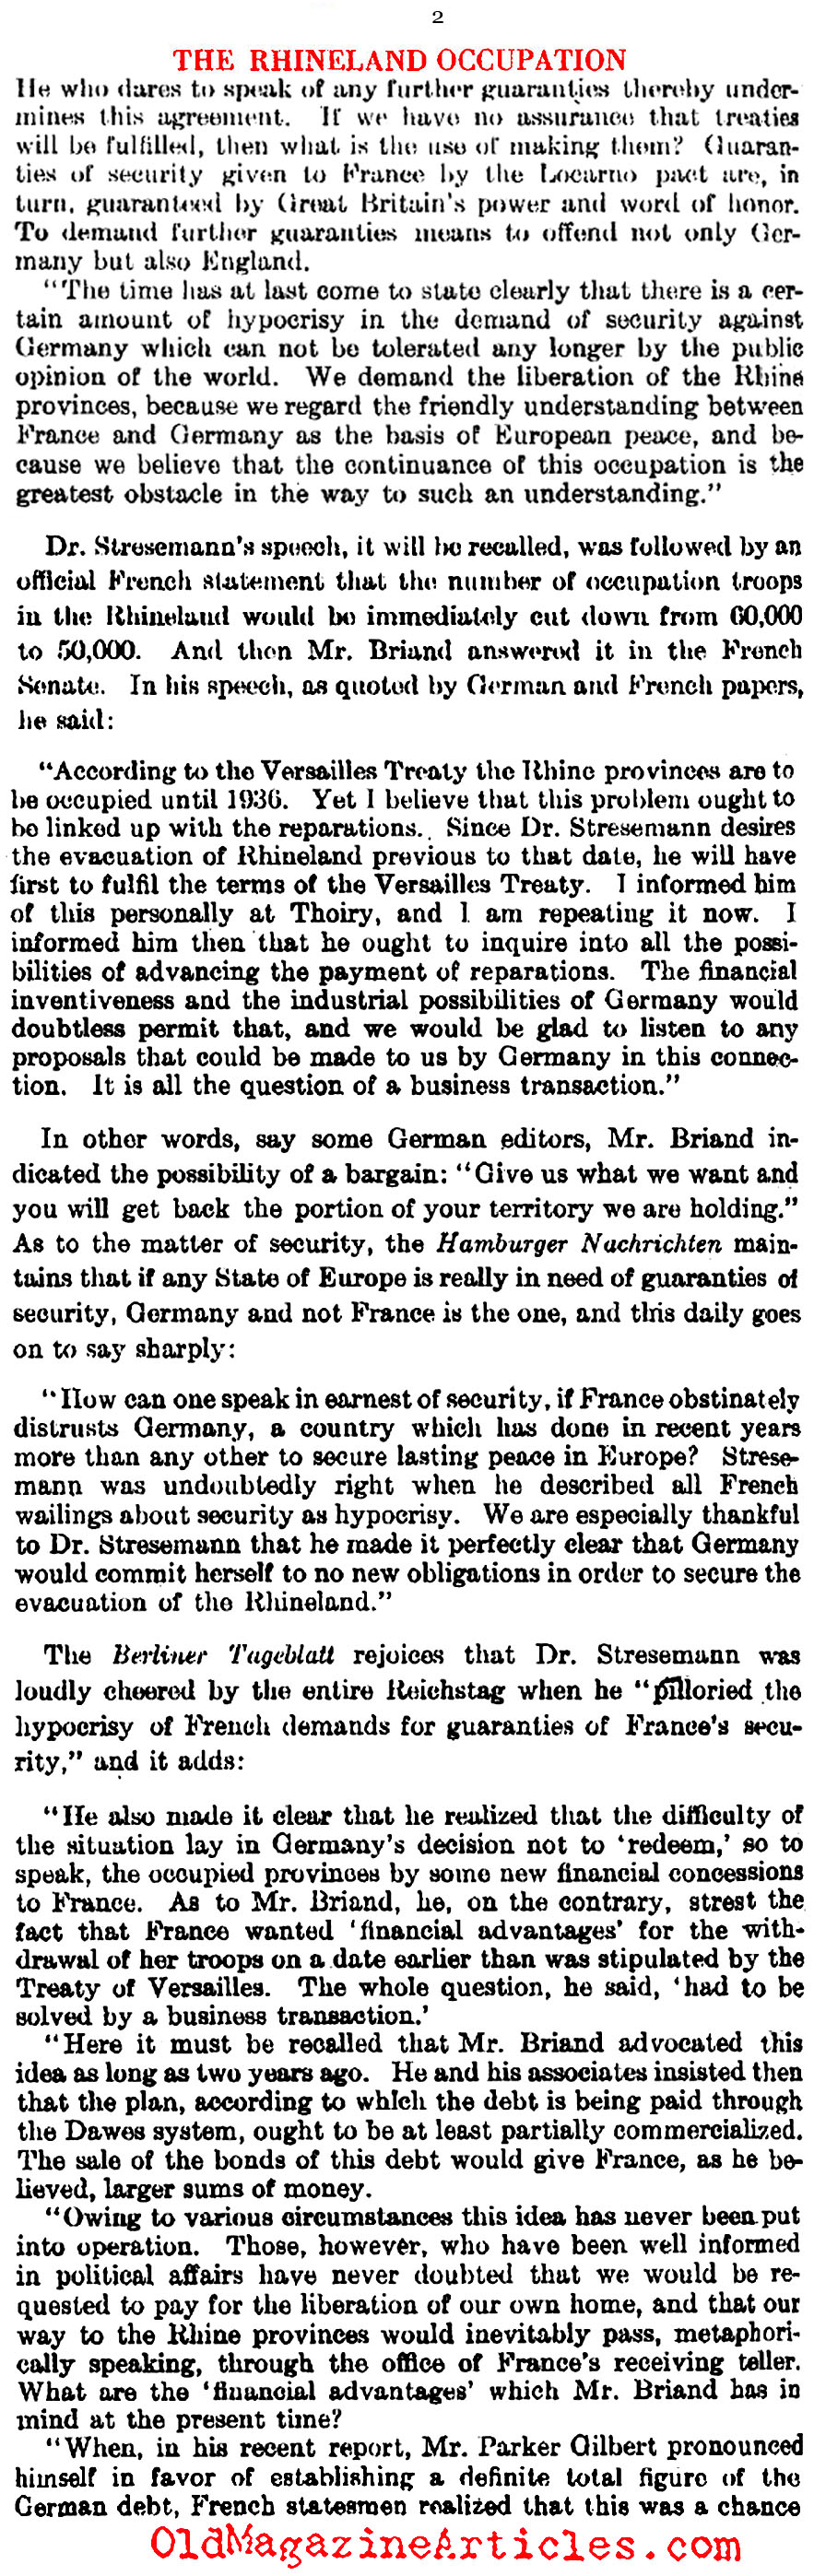 The Ongoing French Occupation of Germany (Literary Digest, 1928)